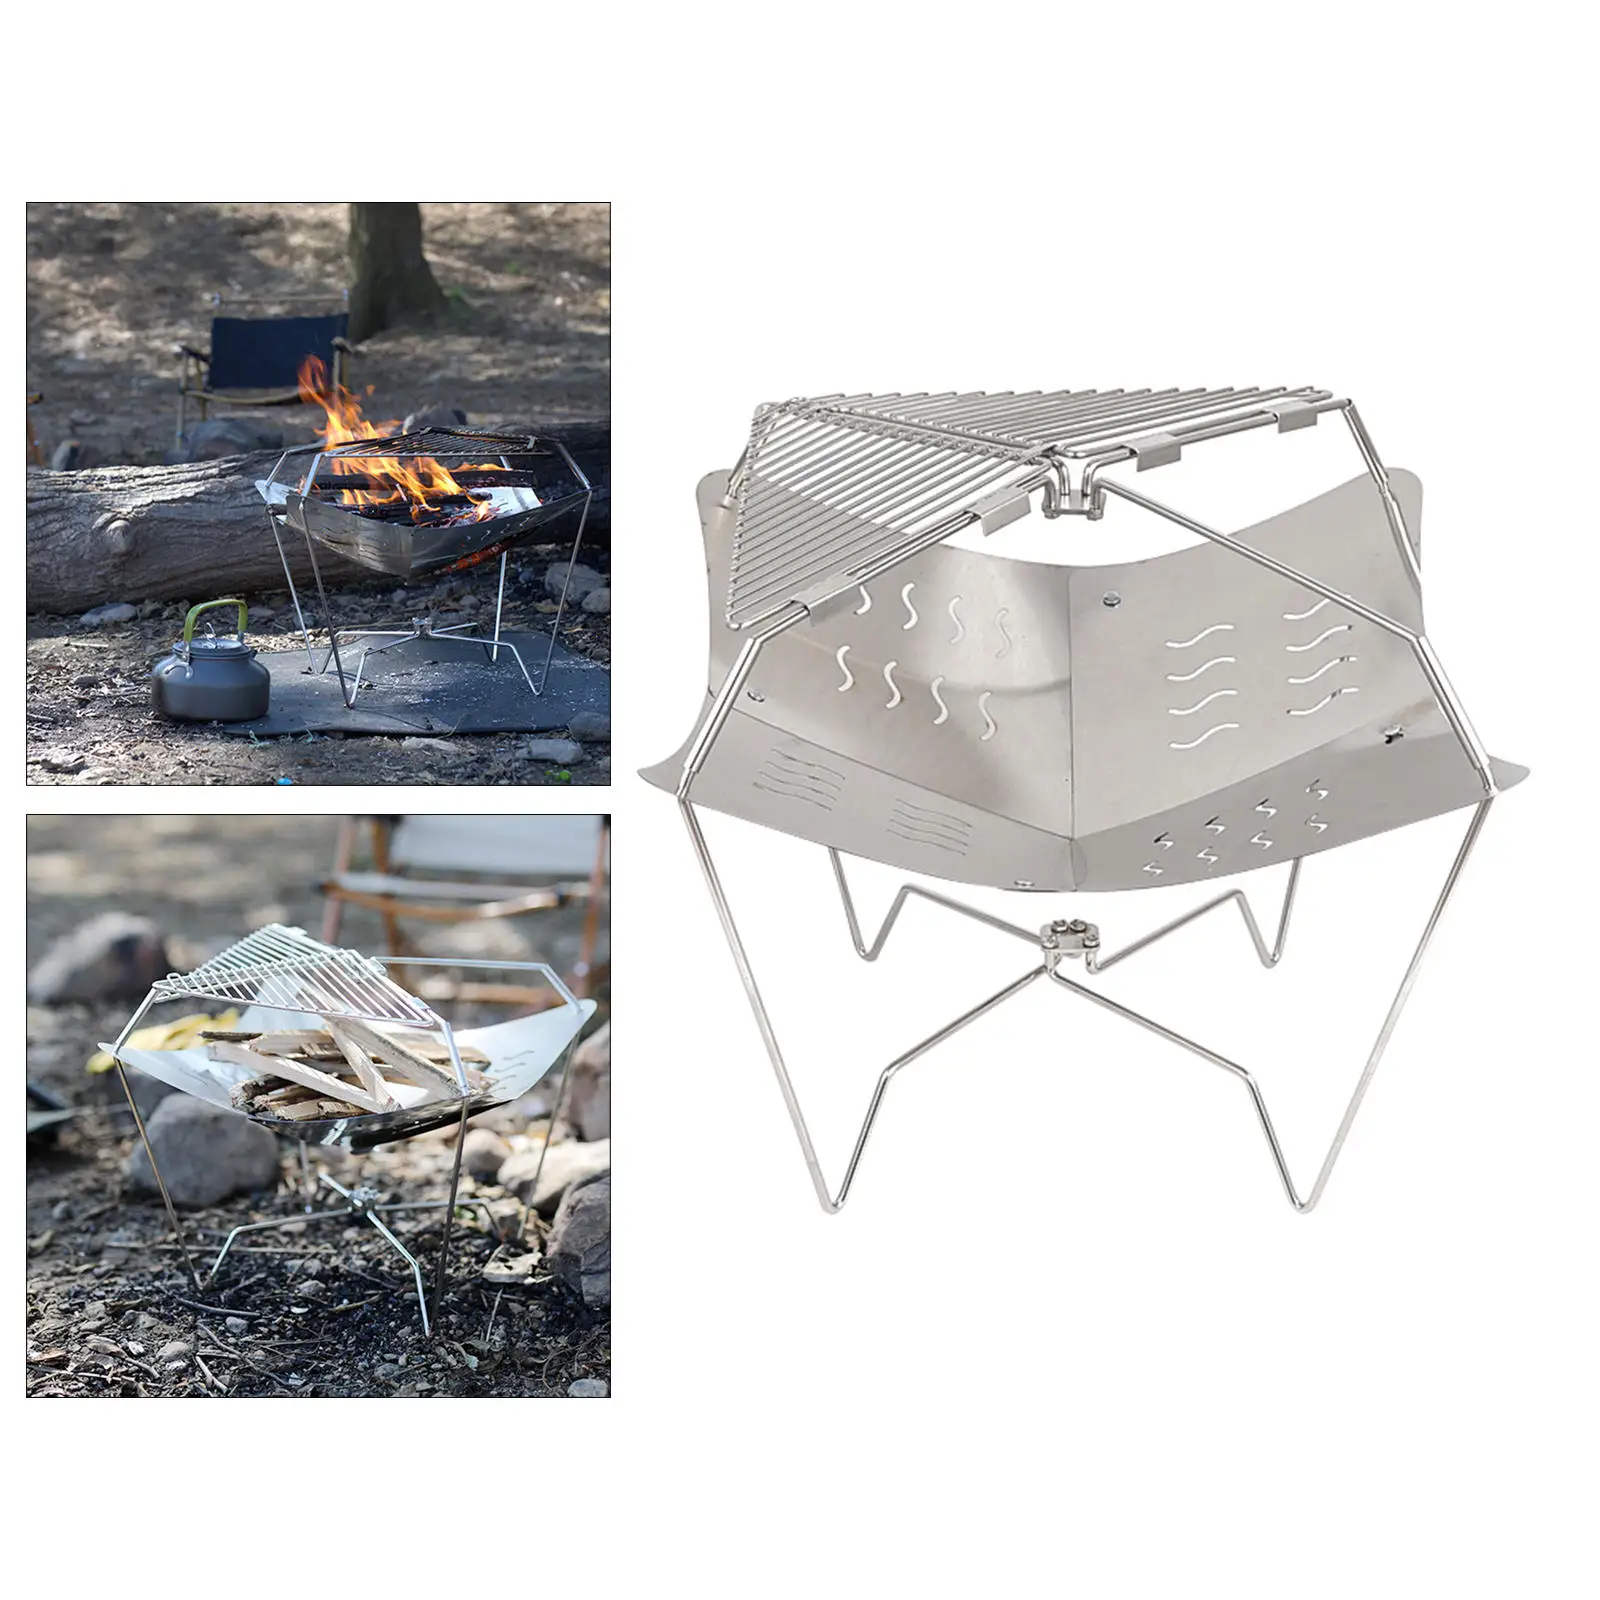 Portable Fire Pit Folding Stove Campfire Rack Fireplace Collapsing Stand Wood Burning for Barbecue Patio Travel Camping